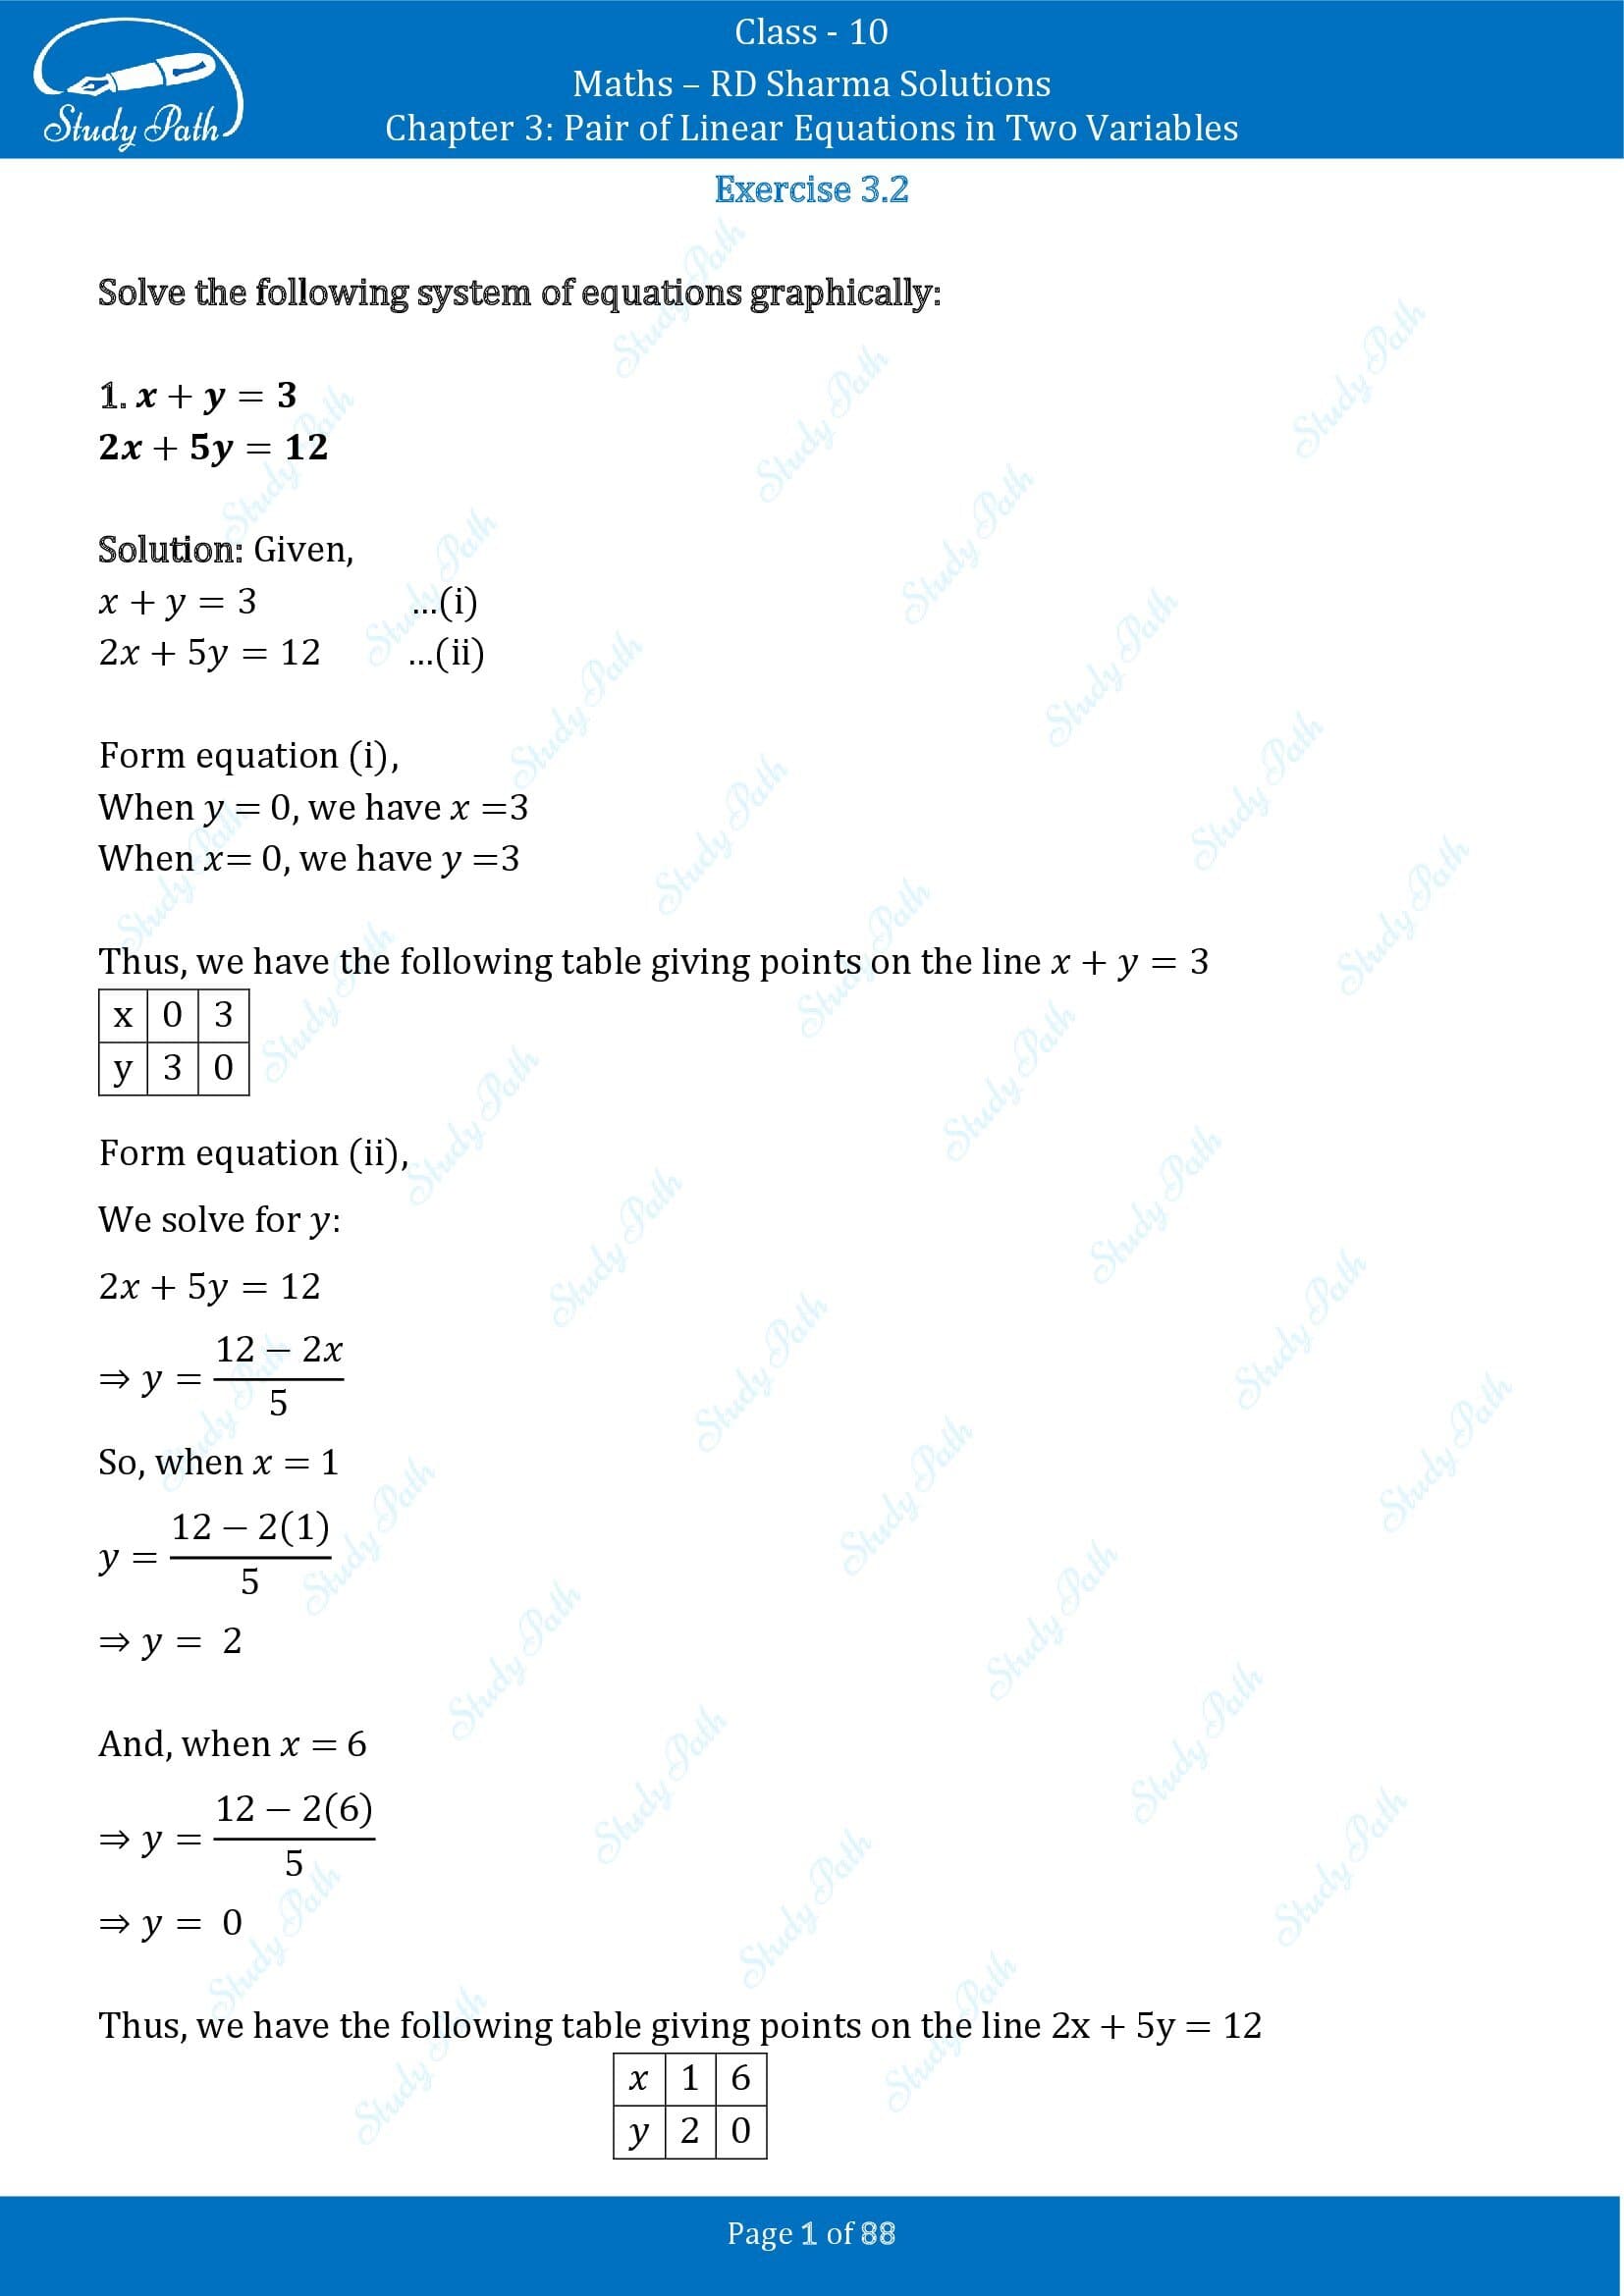 RD Sharma Solutions Class 10 Chapter 3 Pair of Linear Equations in Two Variables Exercise 3.2 00001